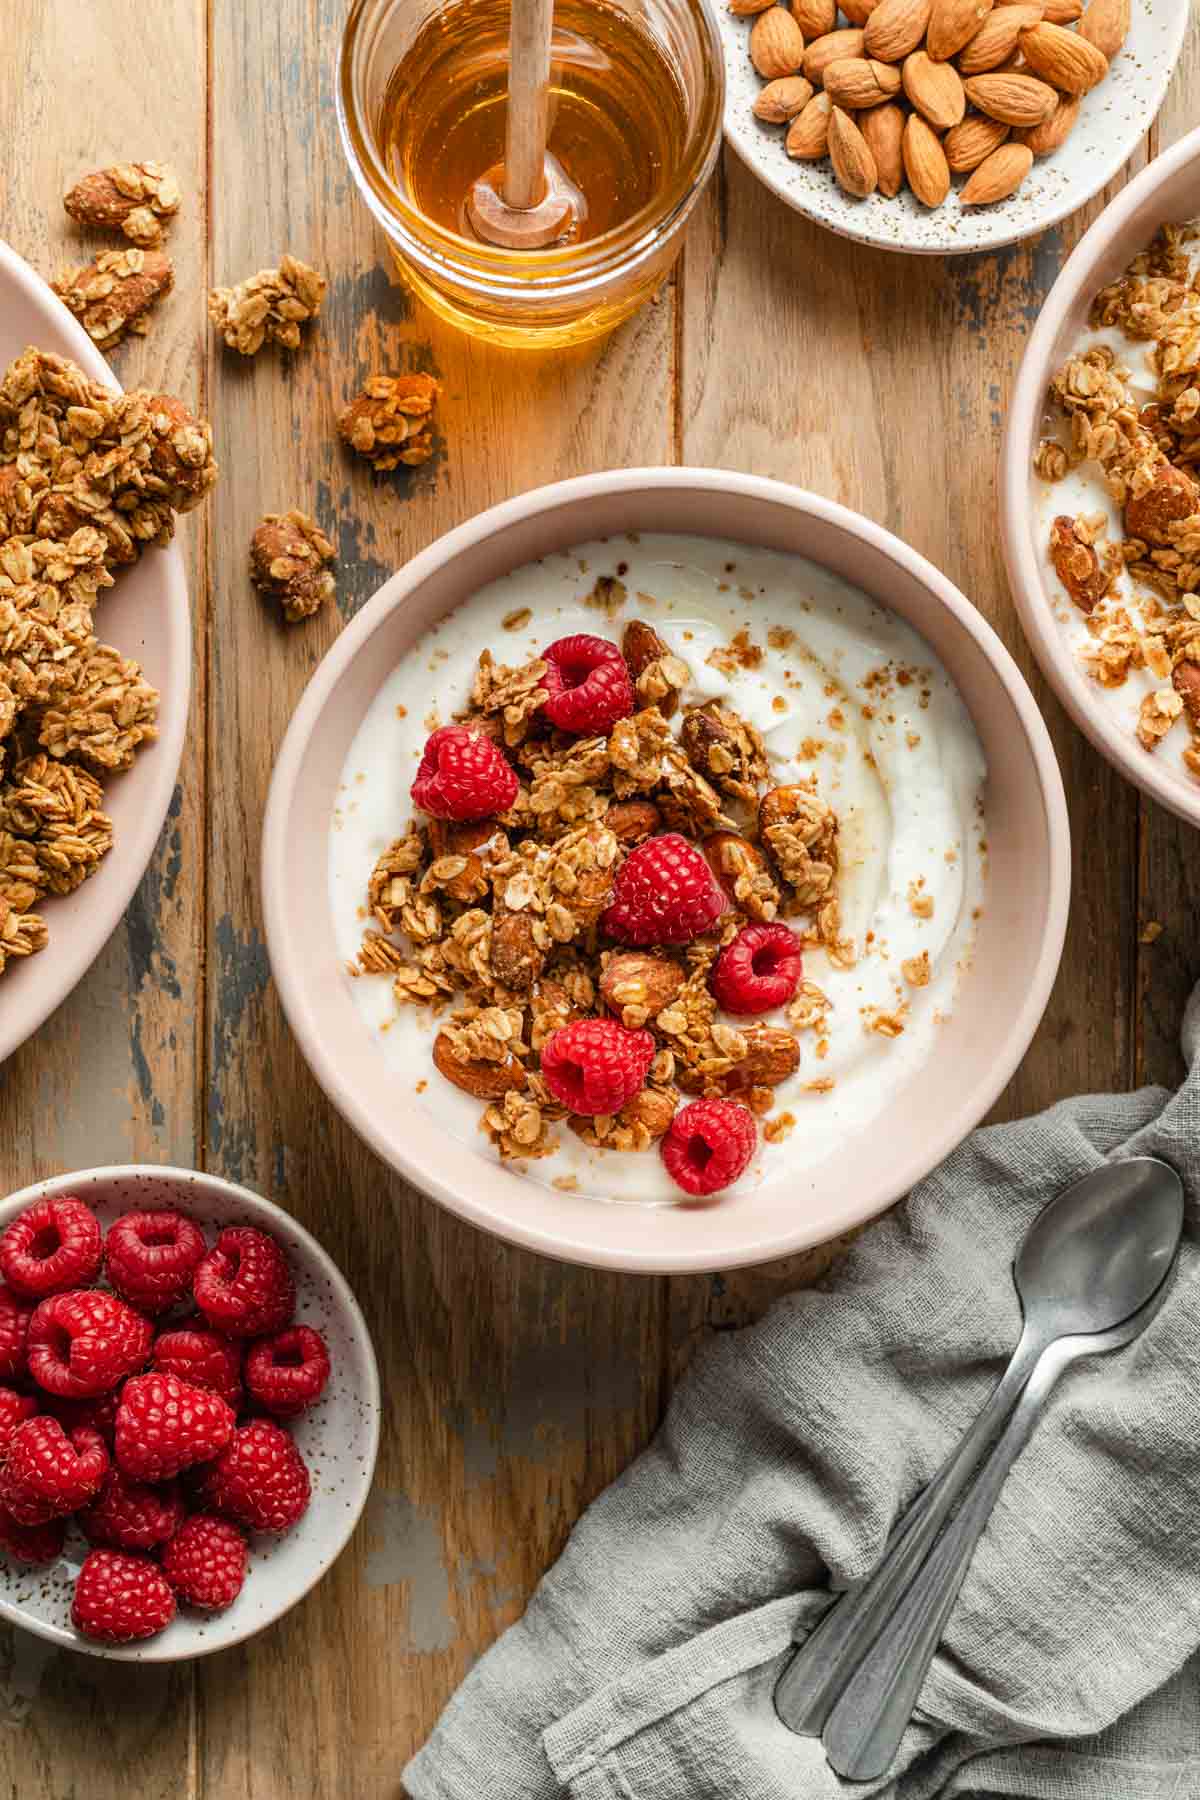 A bowl of yogurt, raspberries and granola on a wooden table surface with raspberries, honey and granola off to the sides.